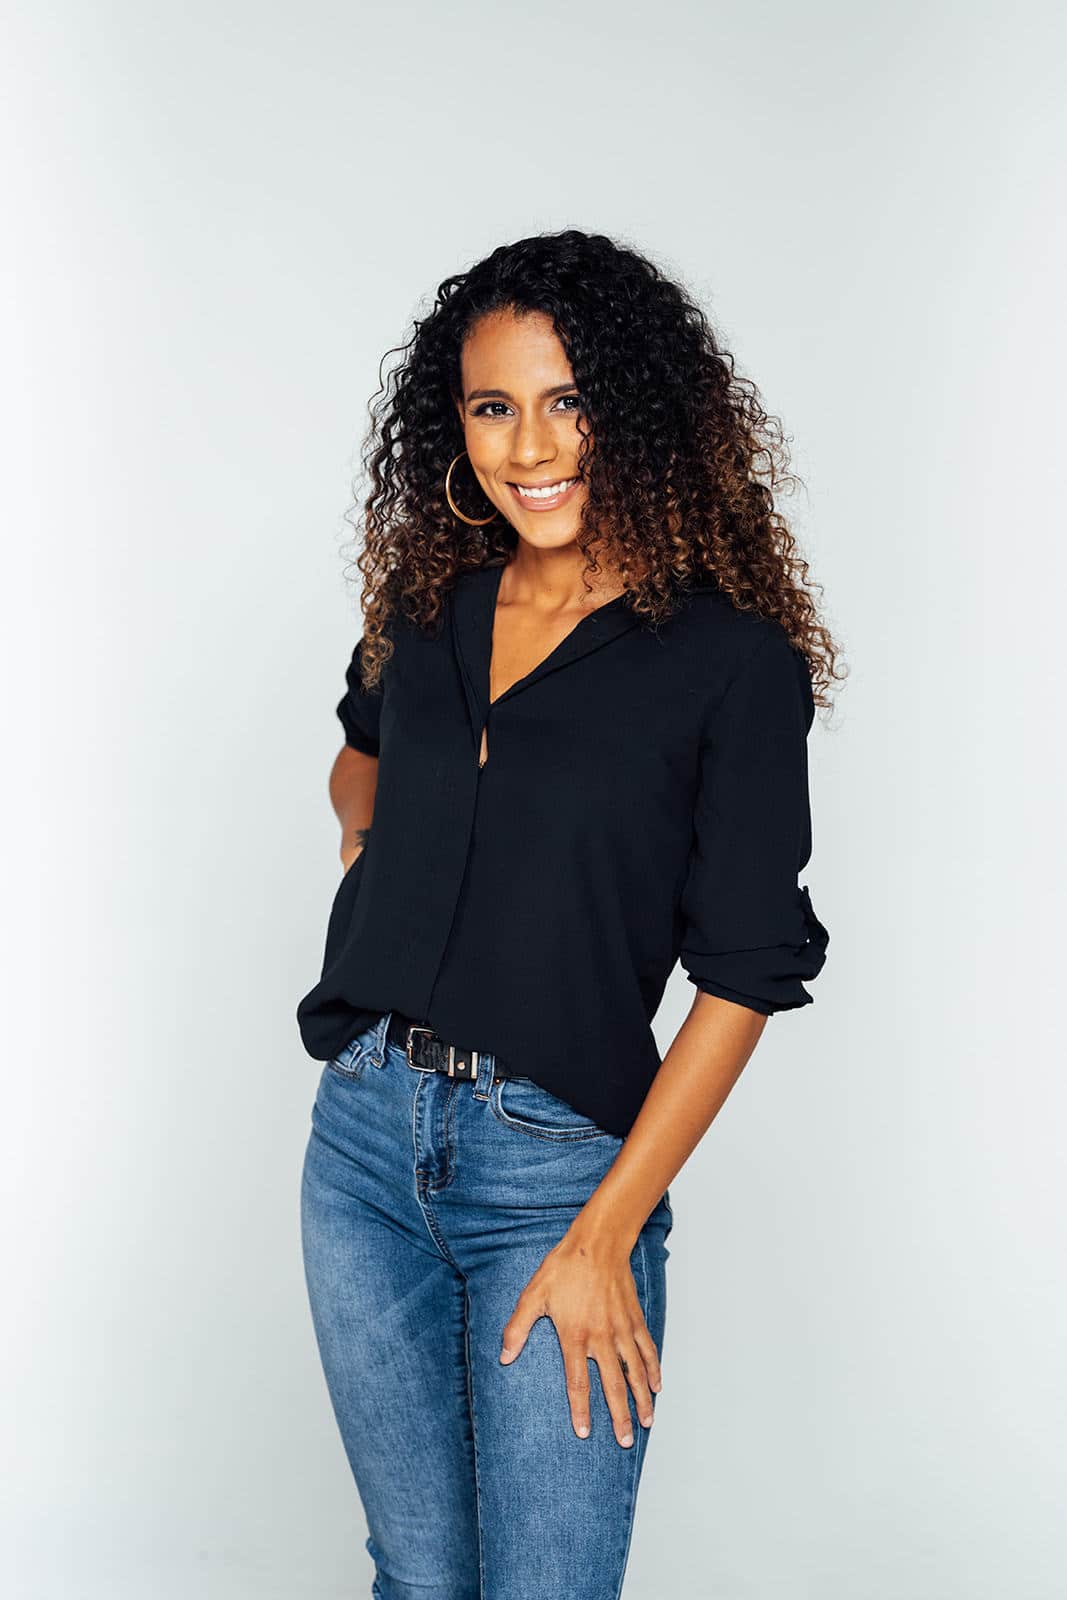 Woman with dark curly hair smiling.